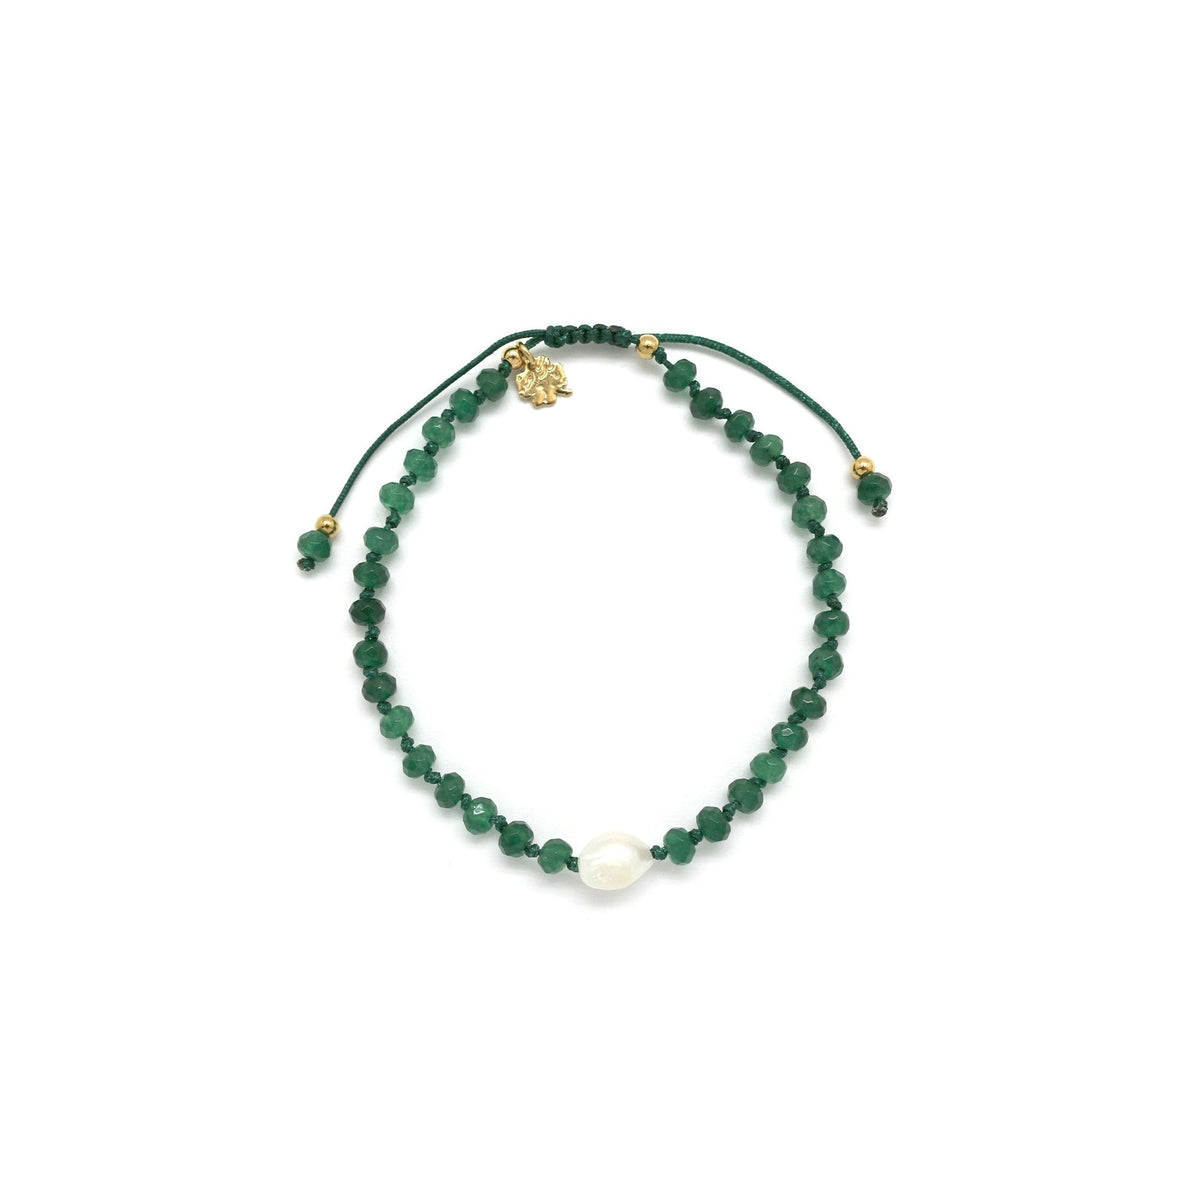 Adjustable green calcite bracelet with water pearl